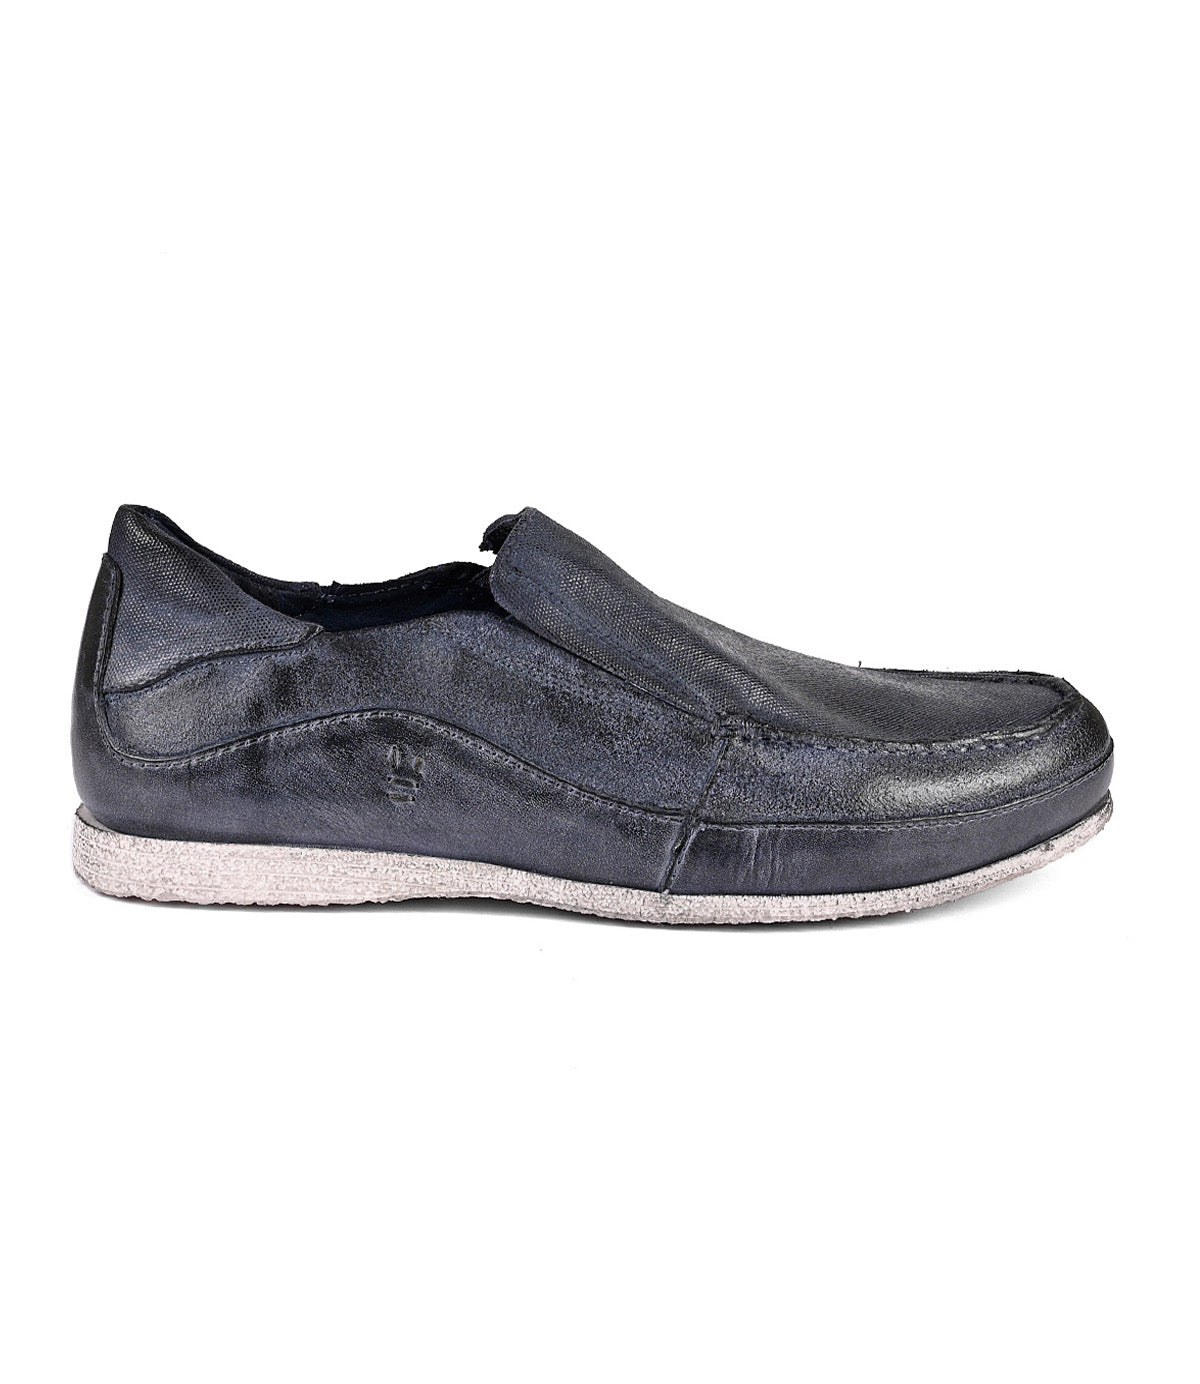 Roan Shevon black leather slip-on shoe with a canvas and leather upper, isolated on a white background.